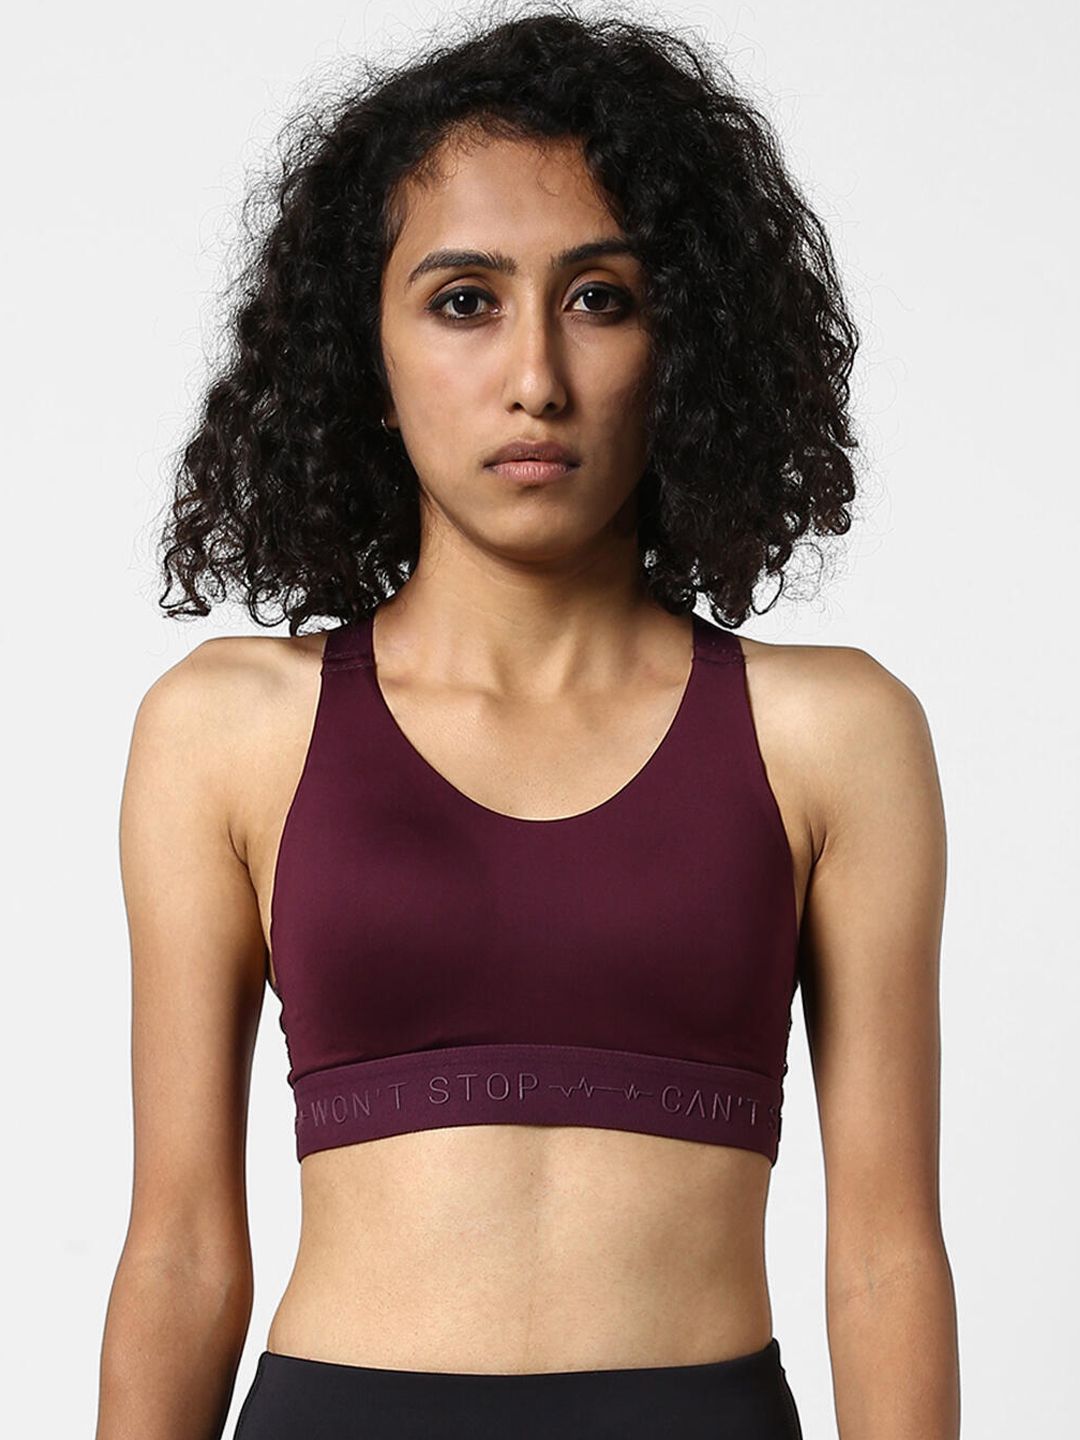 Domyos By Decathlon Maroon Padded High Support Fitness Sports Bra Price in India